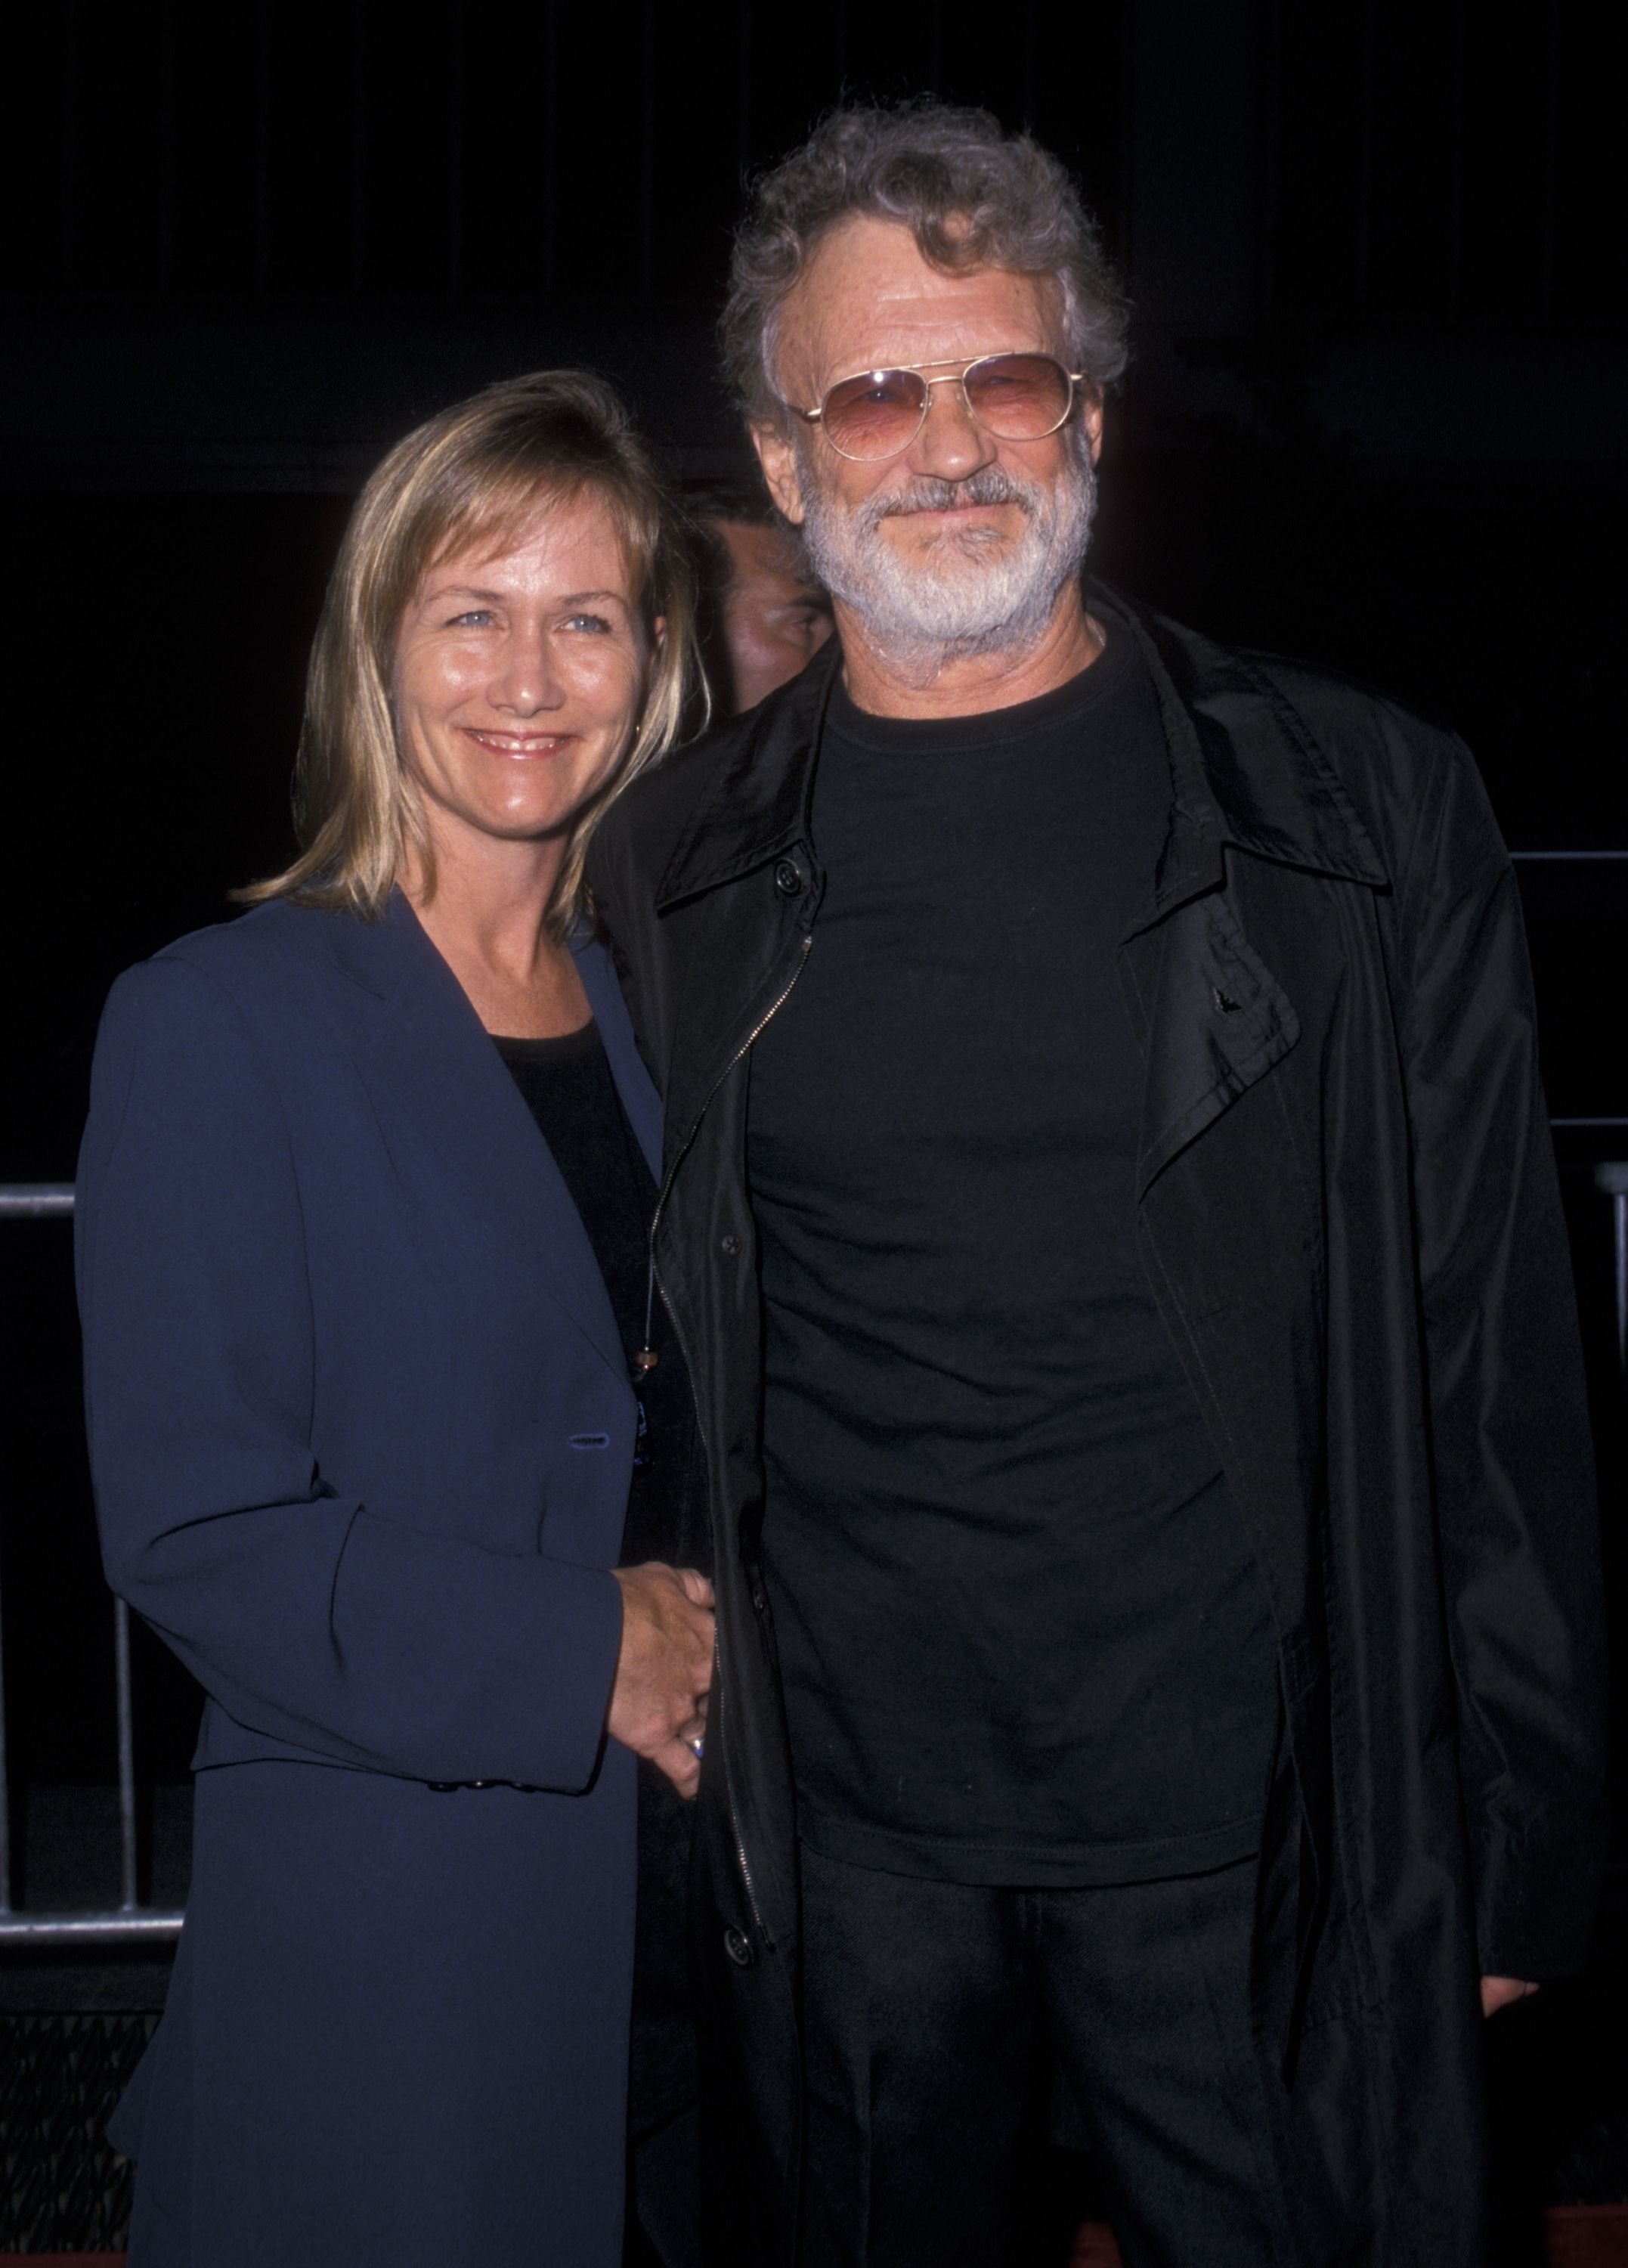 Kris Kristofferson and Lisa Meyers during the premiere of "Planet of the Apes" on July 23, 2001 at the Ziegfeld Theater in New York City. | Source: Getty Images